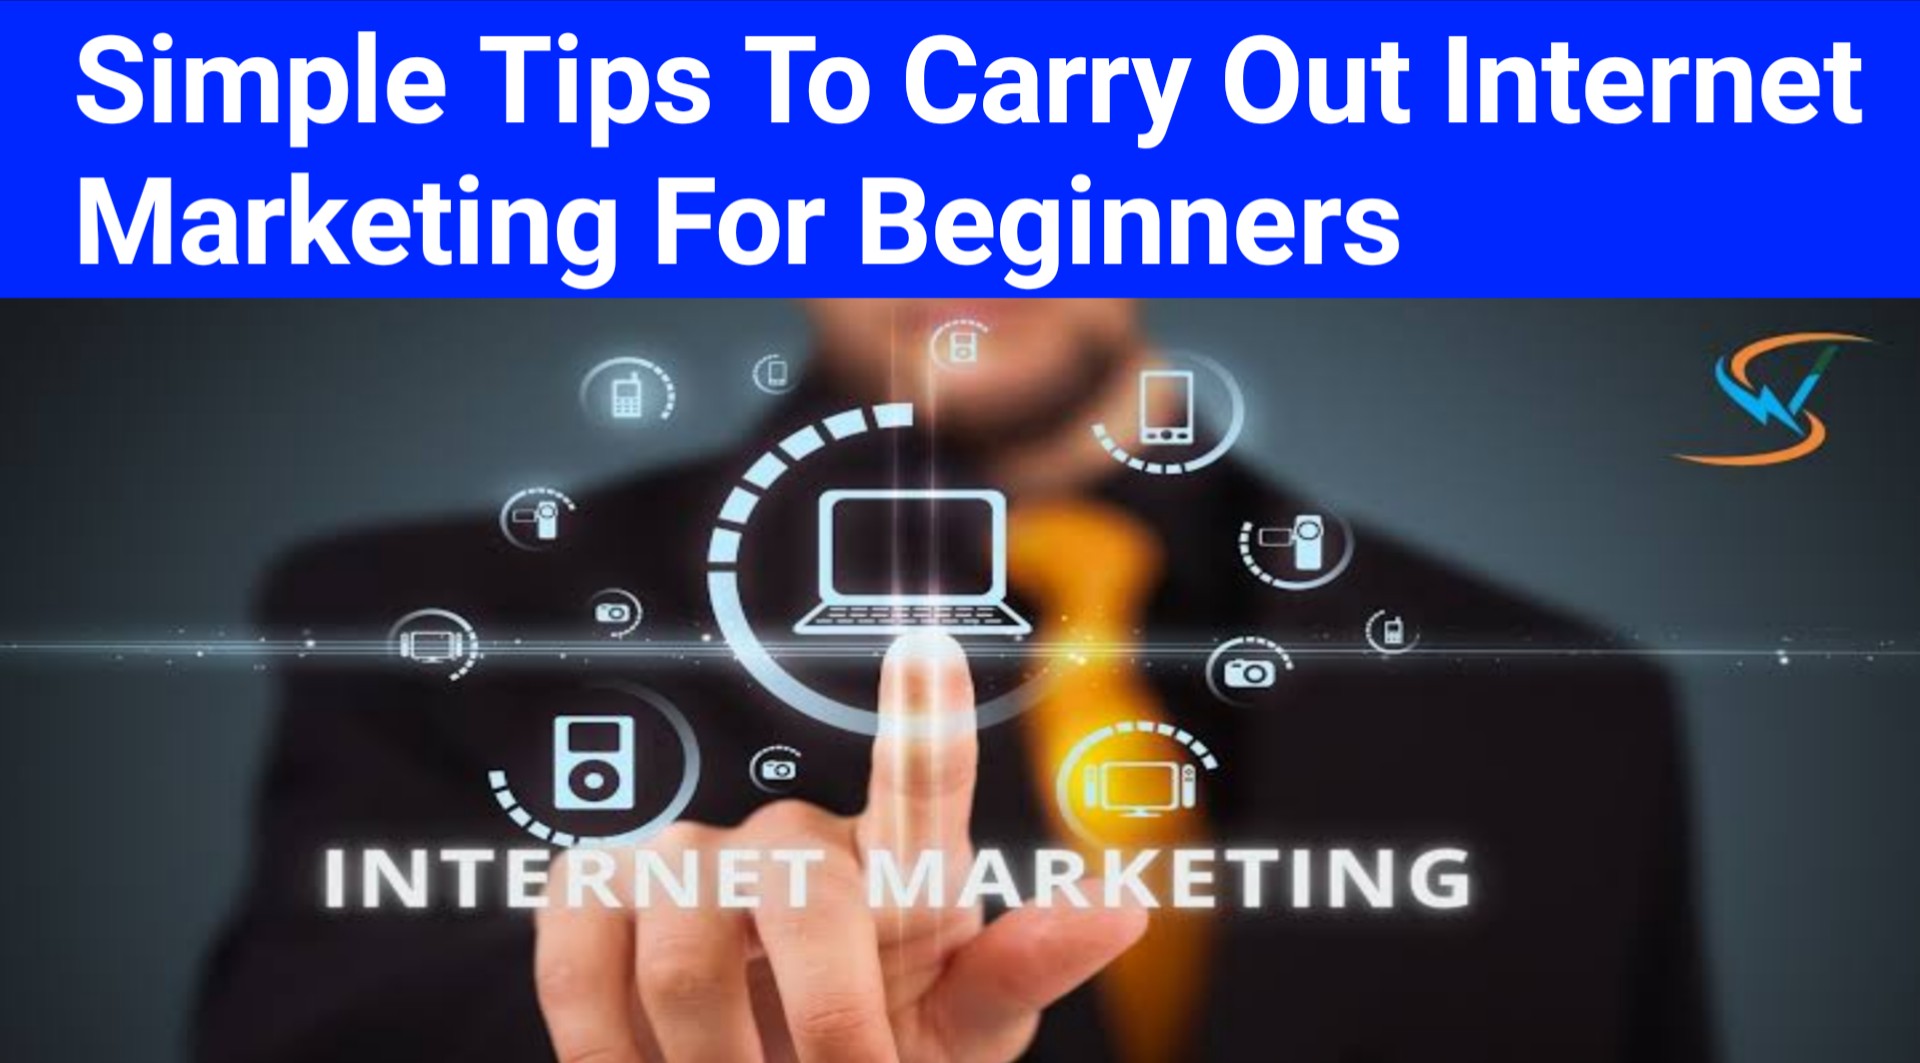 Simple Tips To Carry Out Internet Marketing For Beginners